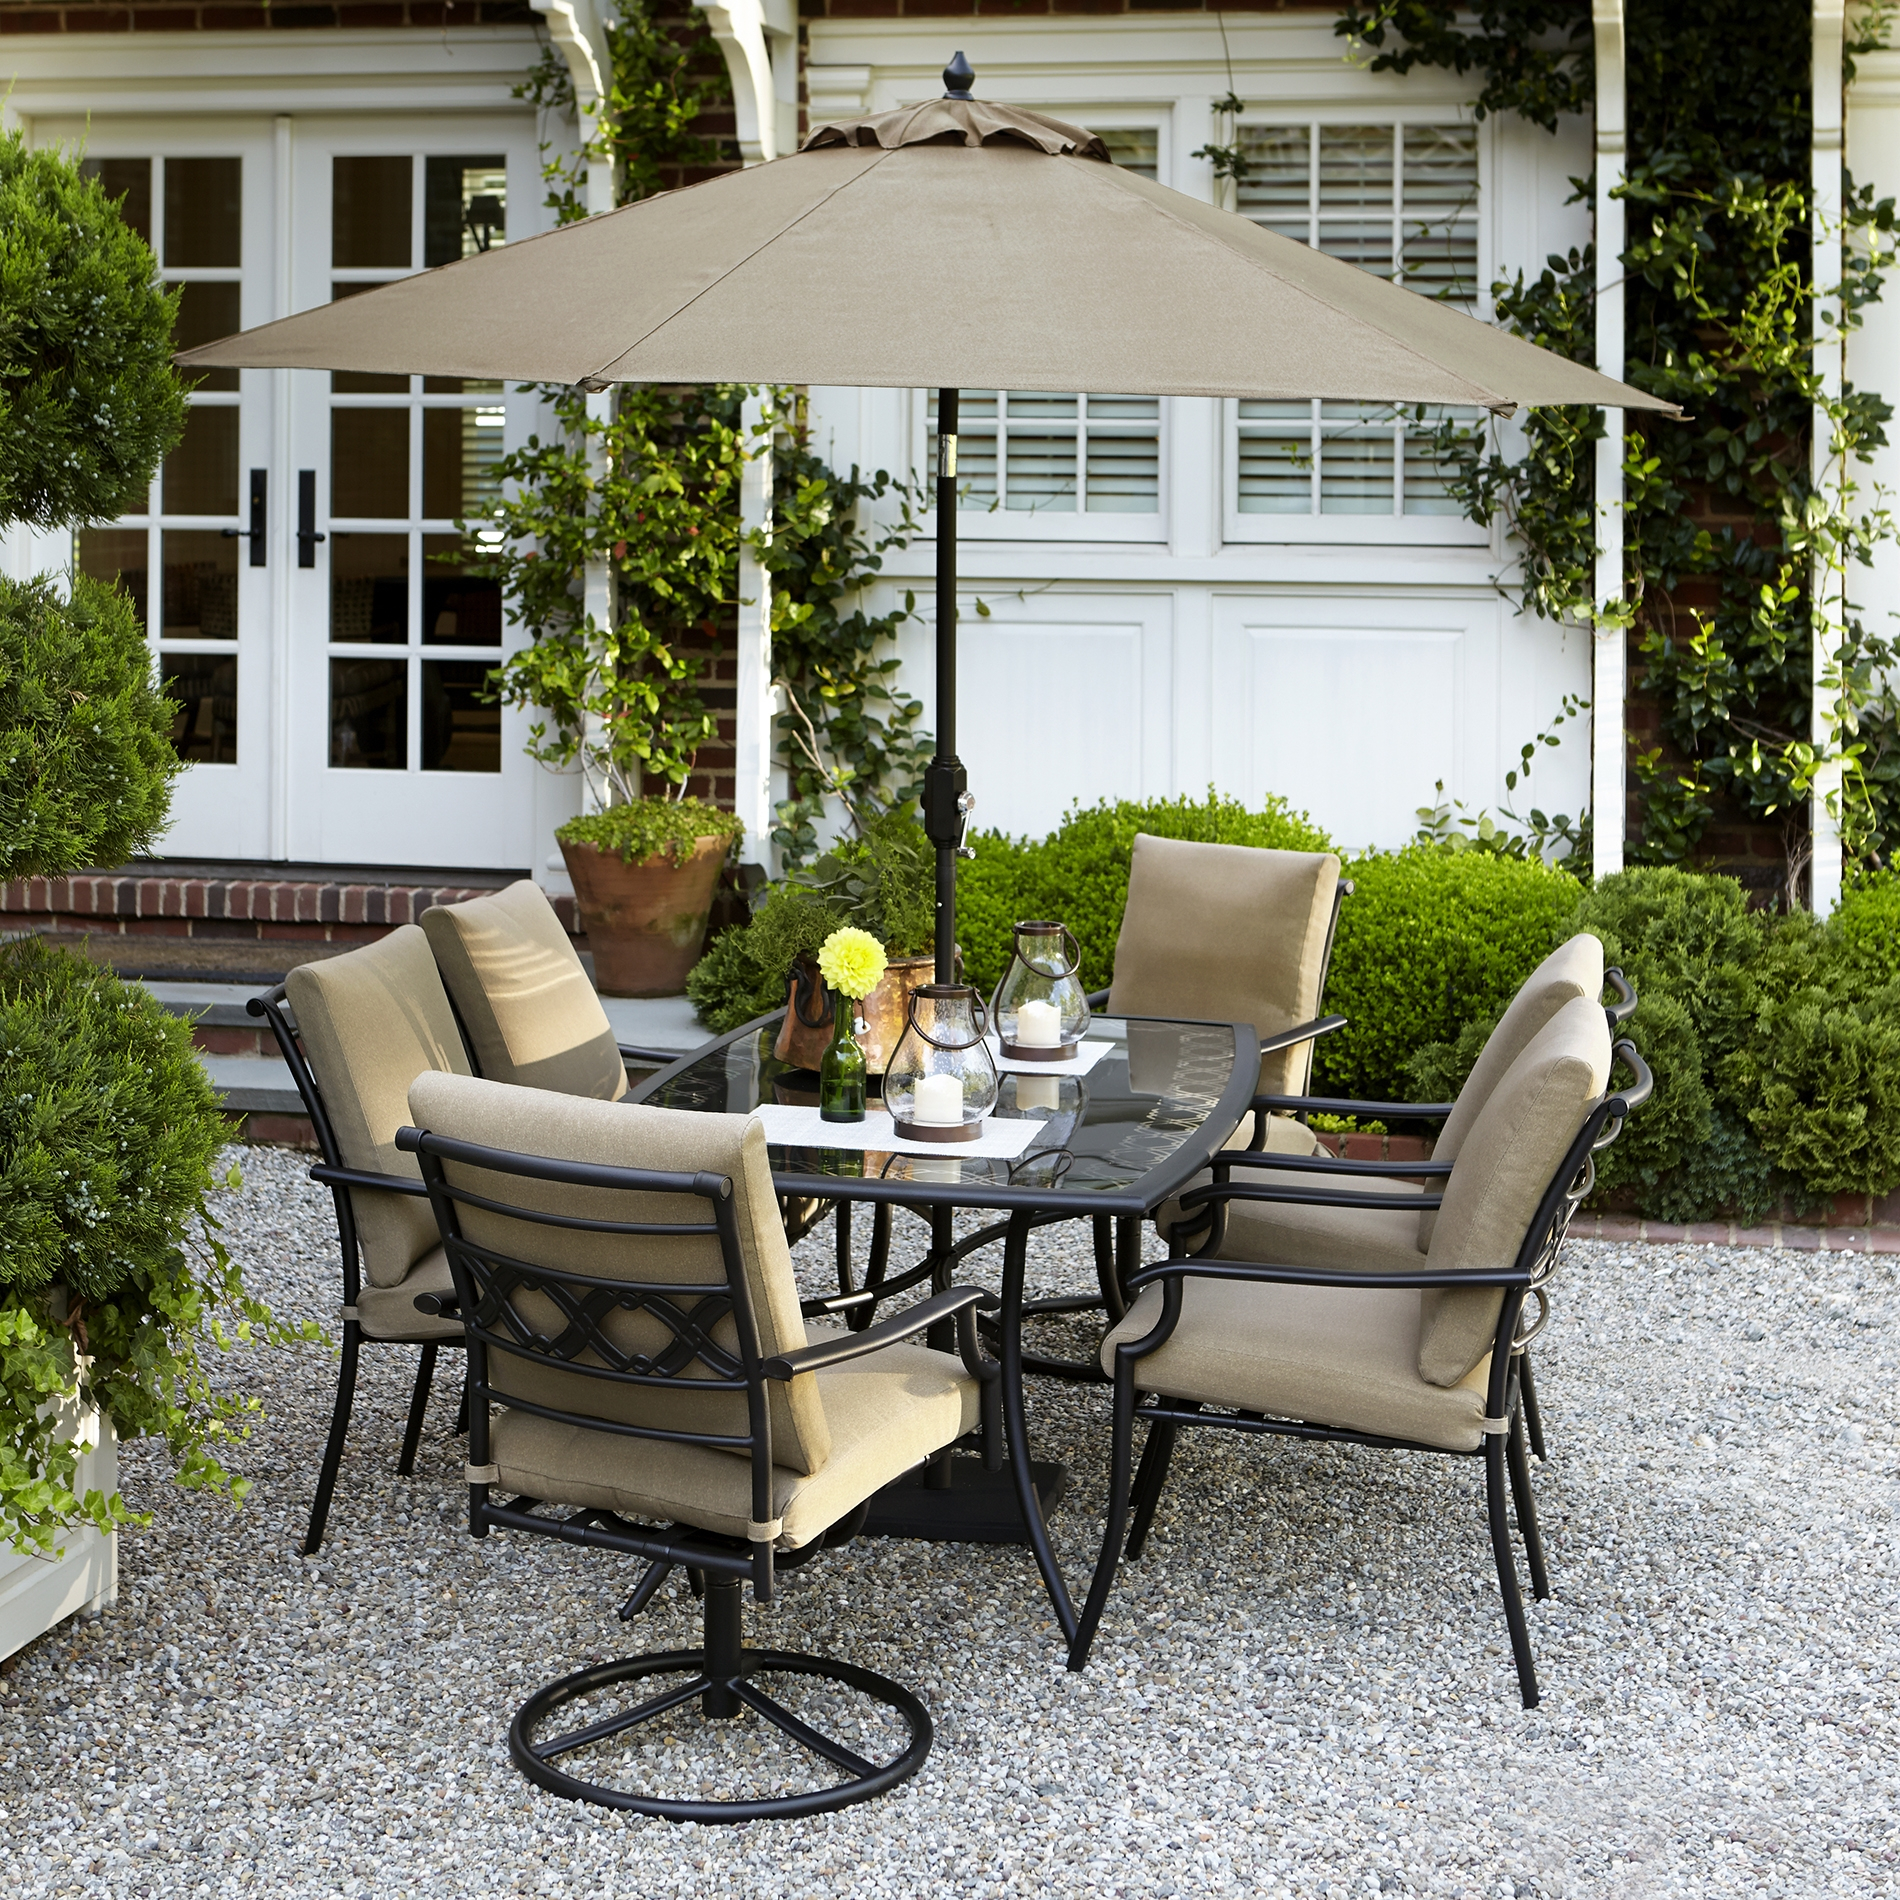 Awesome Patio Furniture Raleigh Nc Creative Design Ideas with regard to size 1900 X 1900